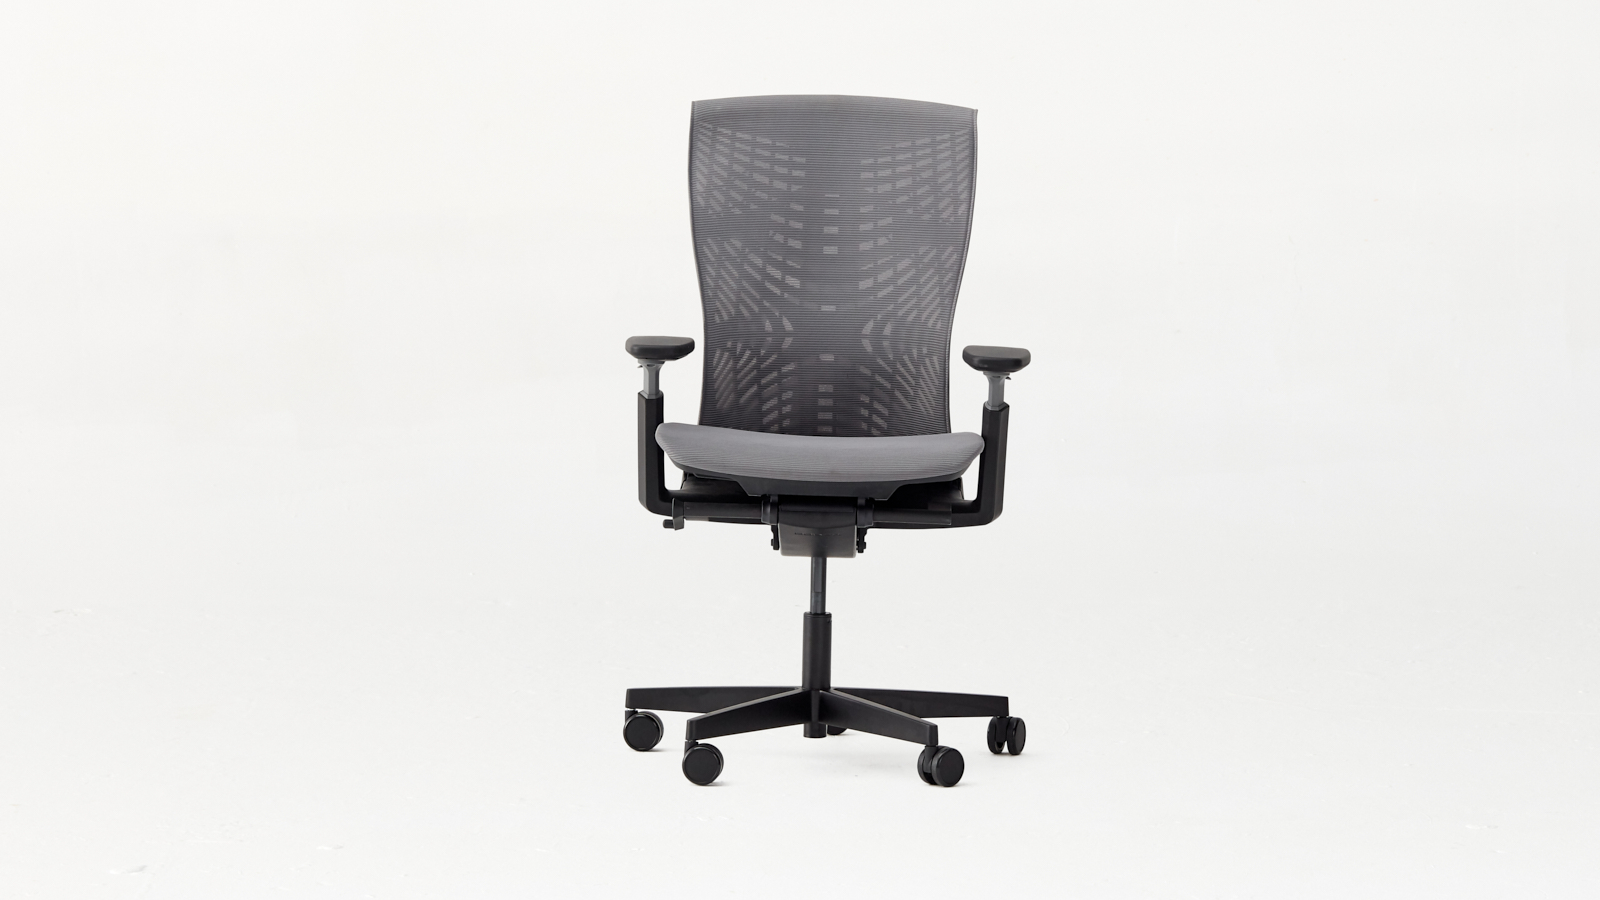 ErgoChair Plus  The Best Ergonomic Chair to Move More and Feel Better